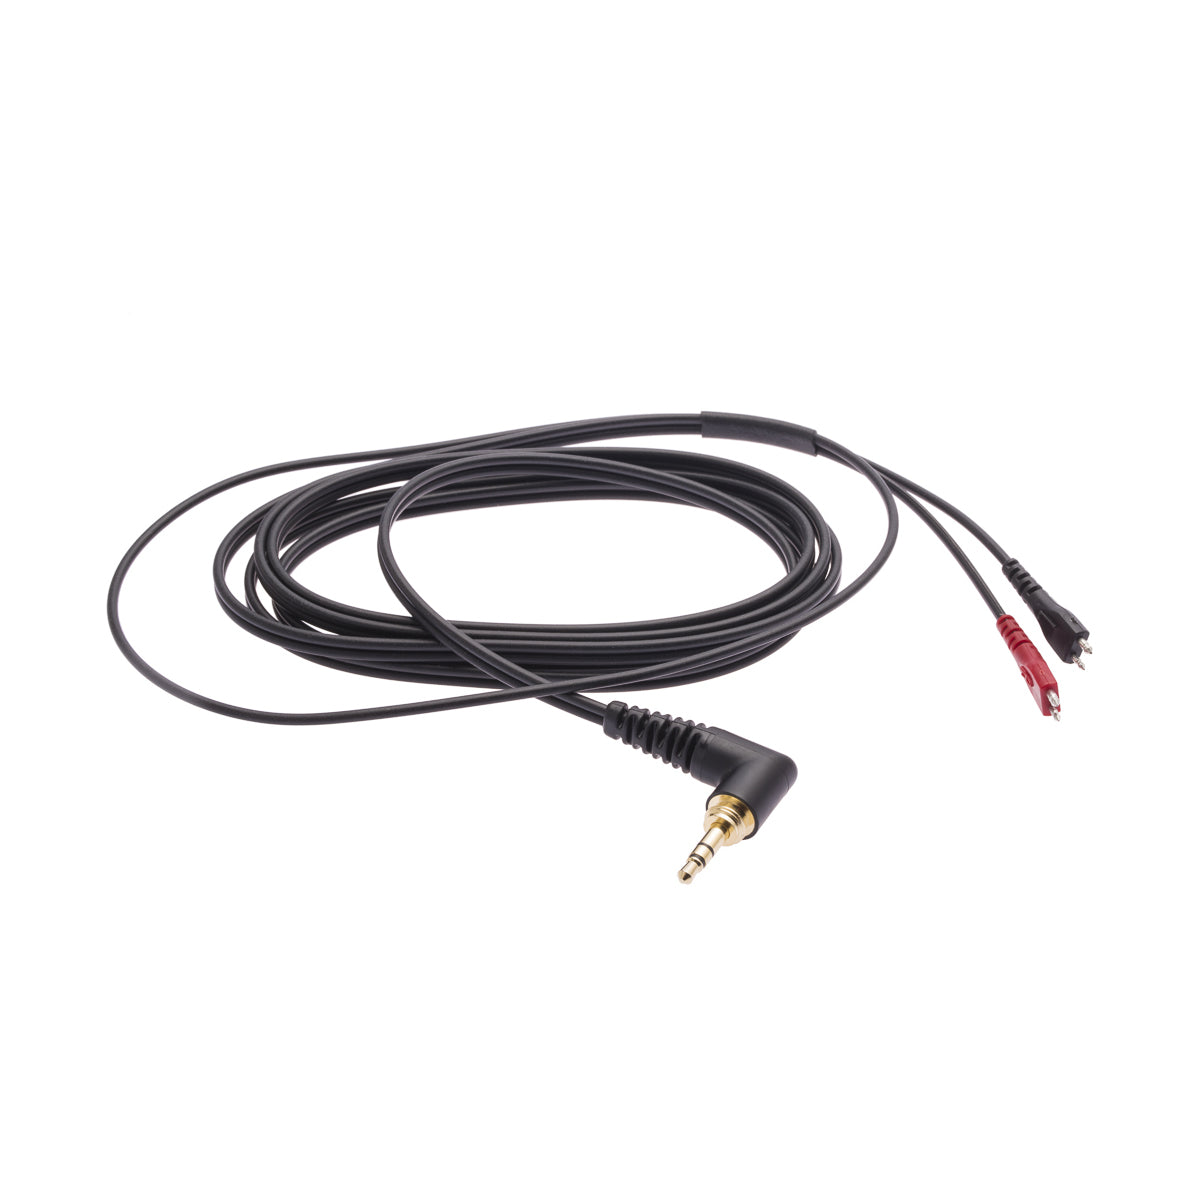 Sennheiser Spares - Cable with Angled Plug, 1.5m, For HD 25